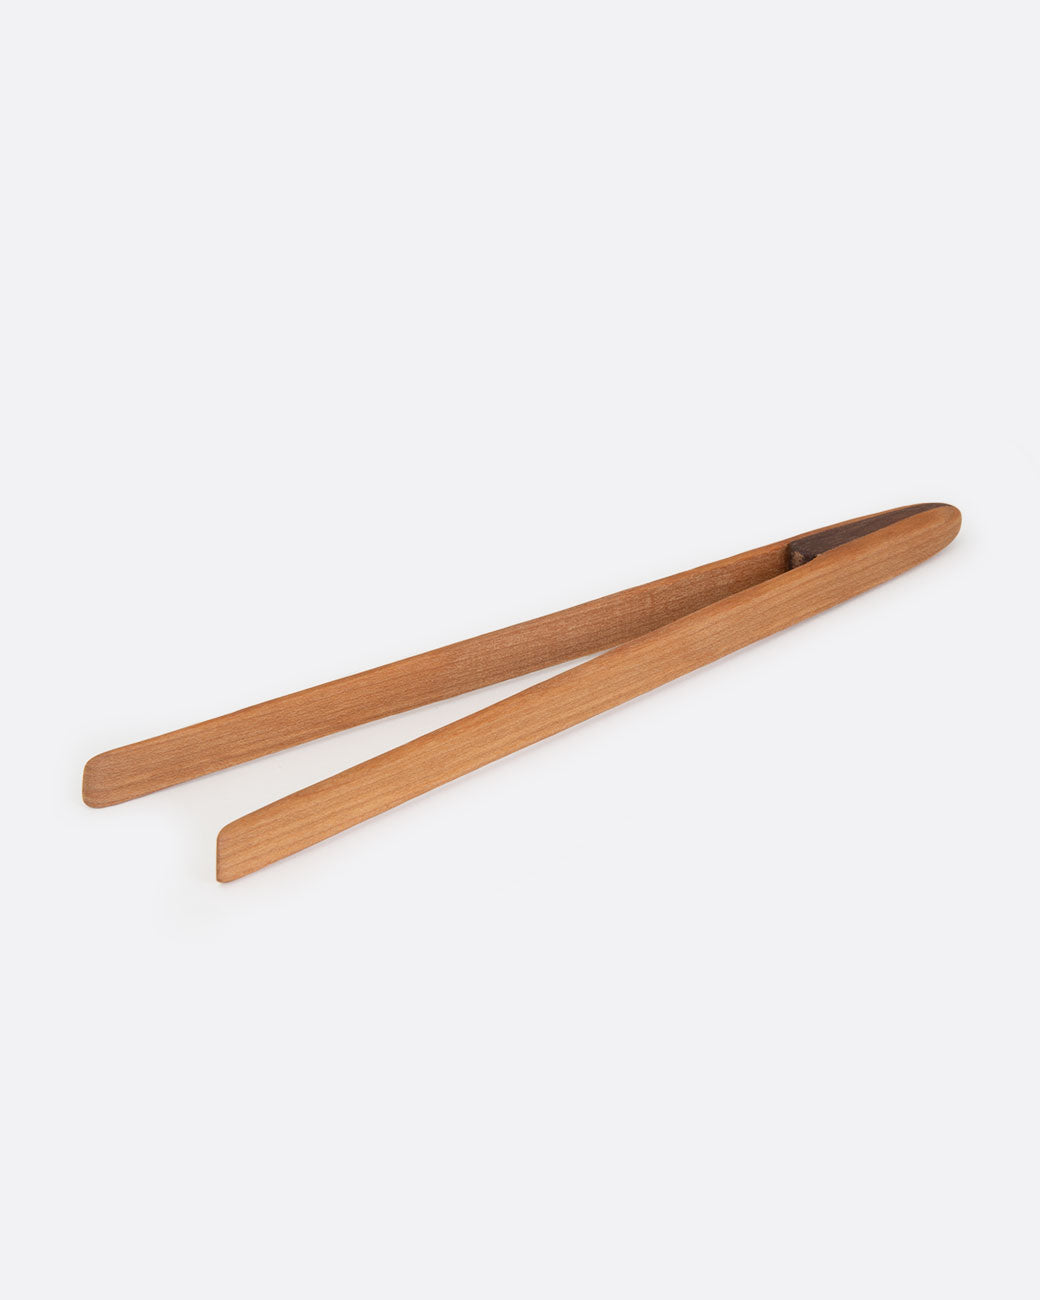 Cherry wood magnetic toaster tongs, shown from the side.